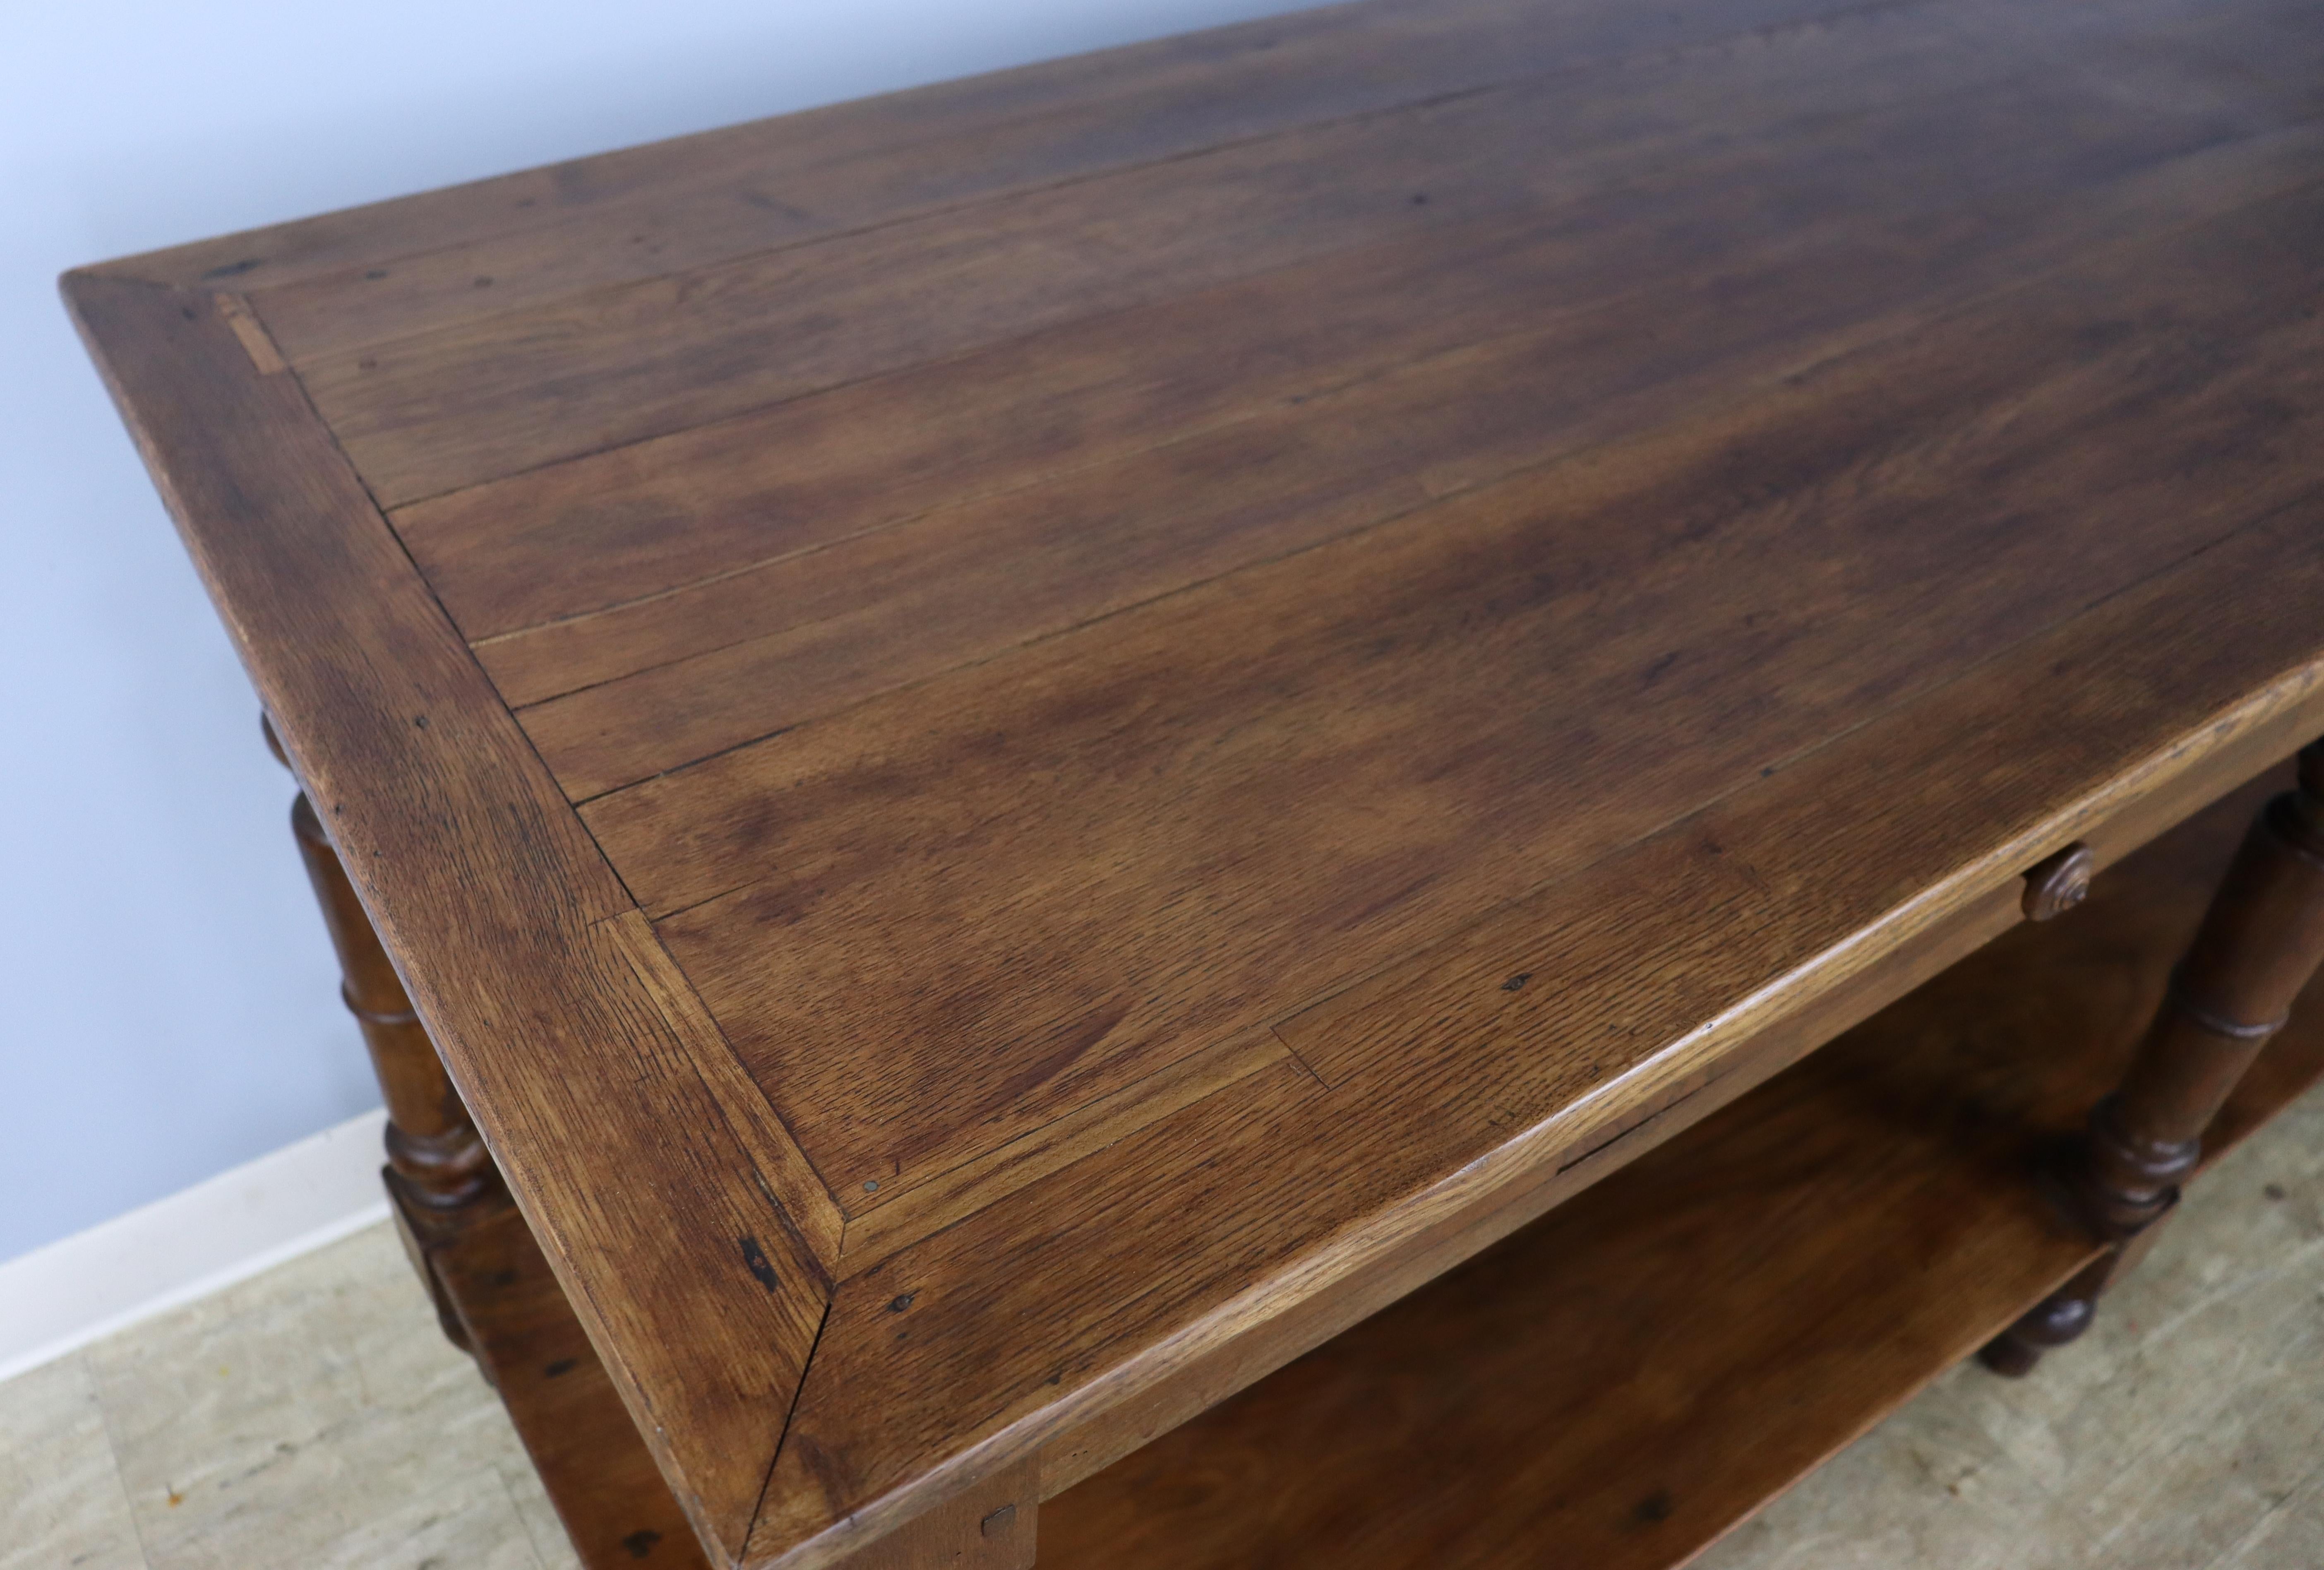 19th Century Antique Chestnut Draper's Table with Turned Legs